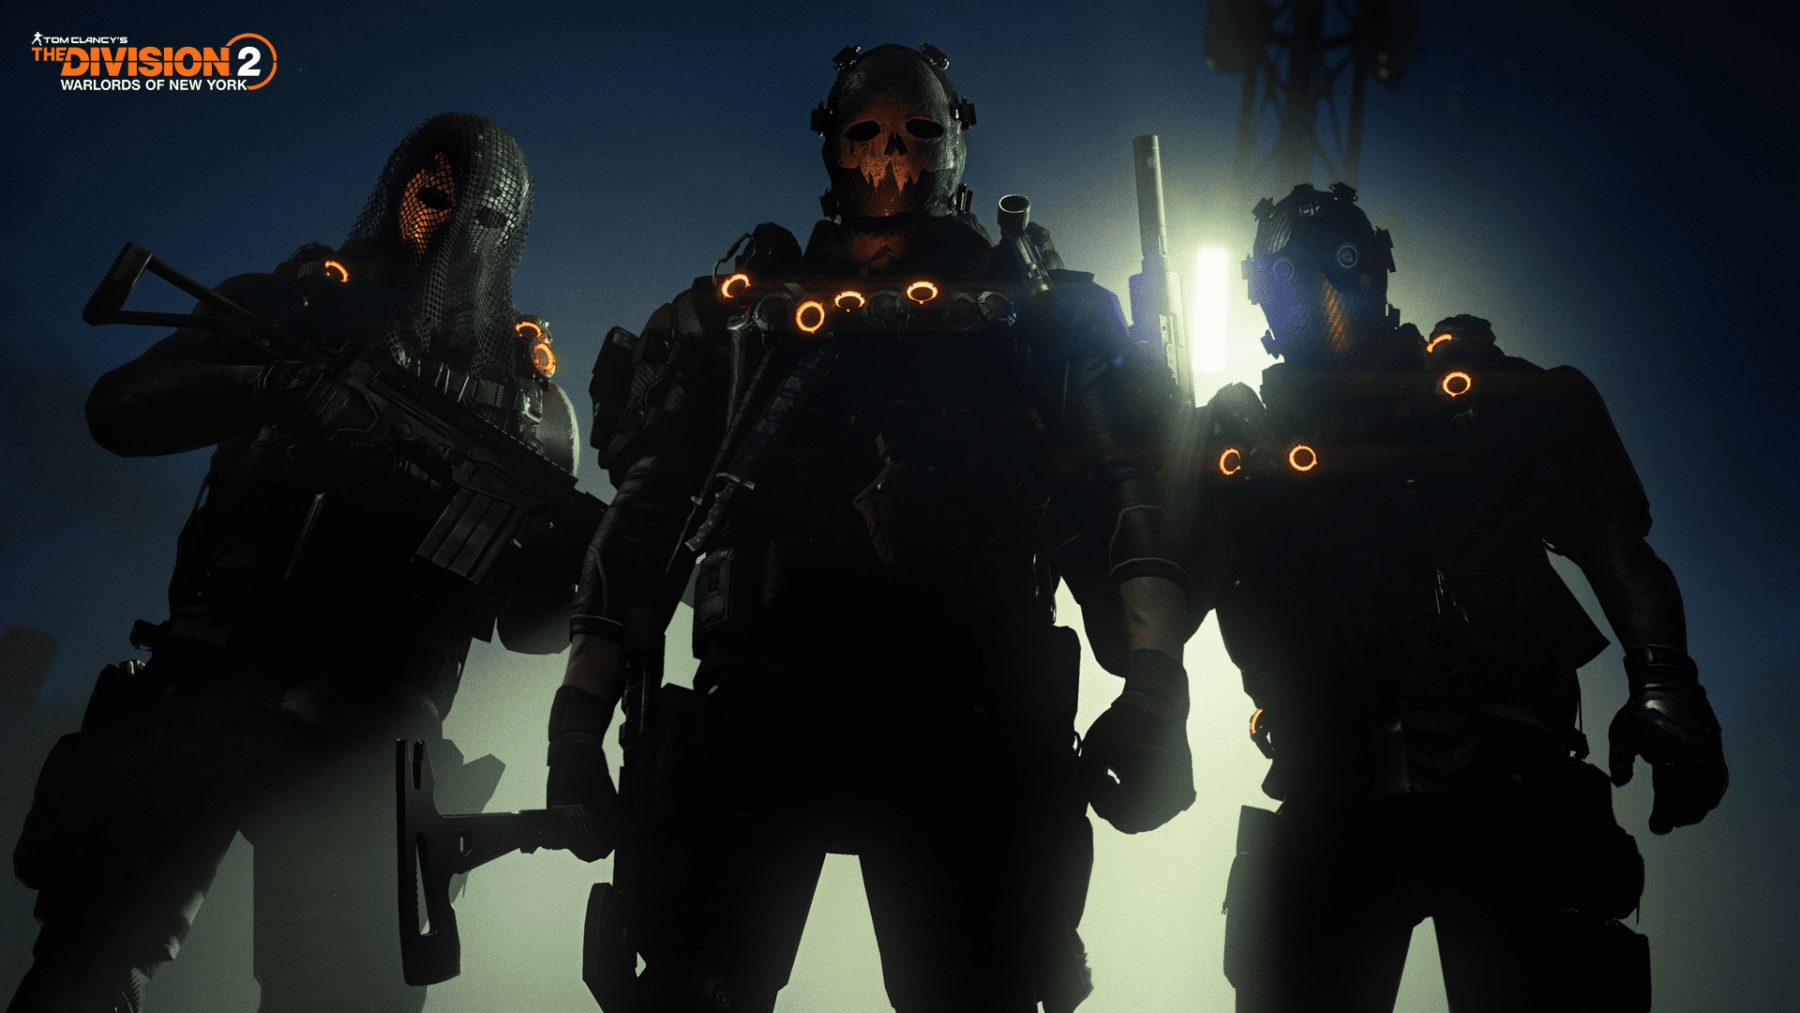 New Content Update For Tom Clancy’s The Division 2 Coming on May 12 -